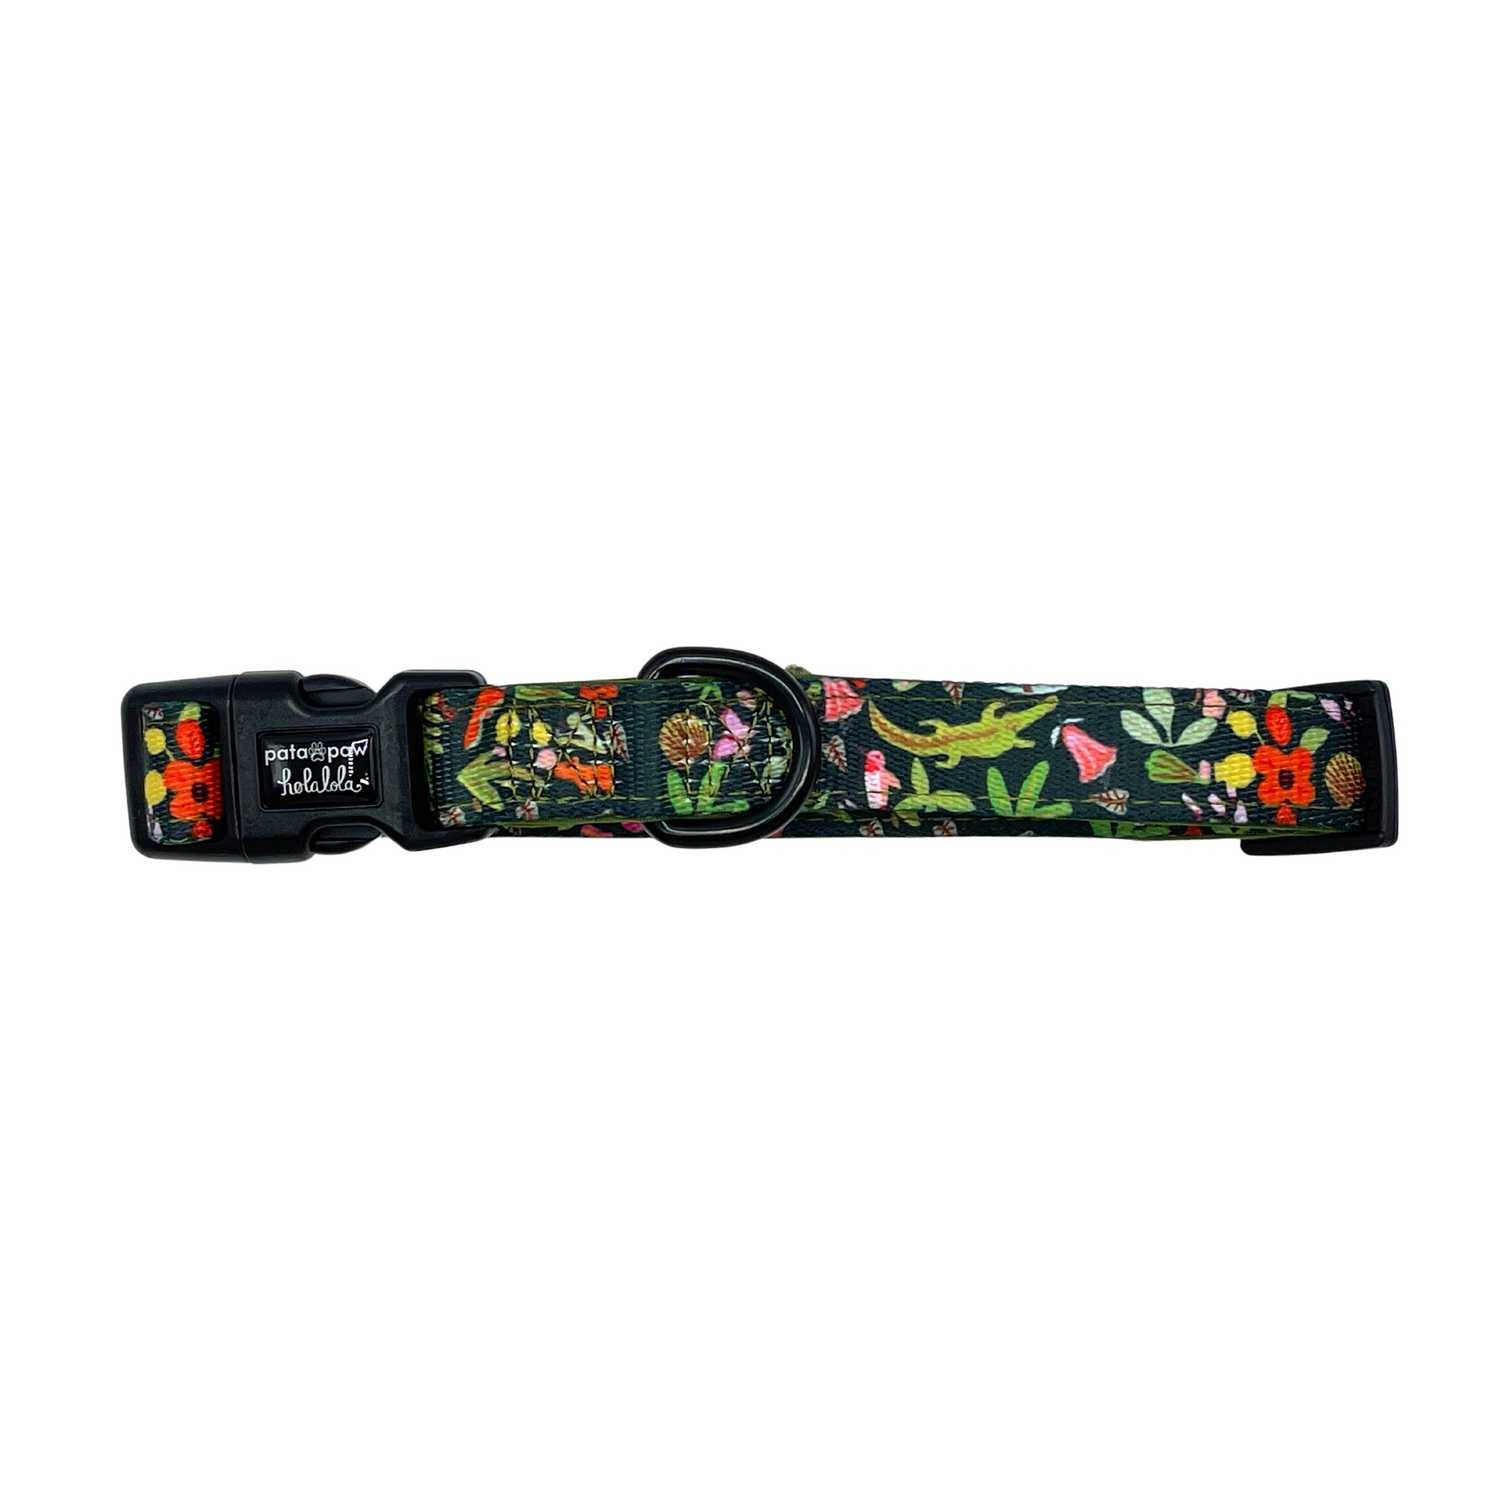 Pata Paw x Holalola collar for dogs and cats